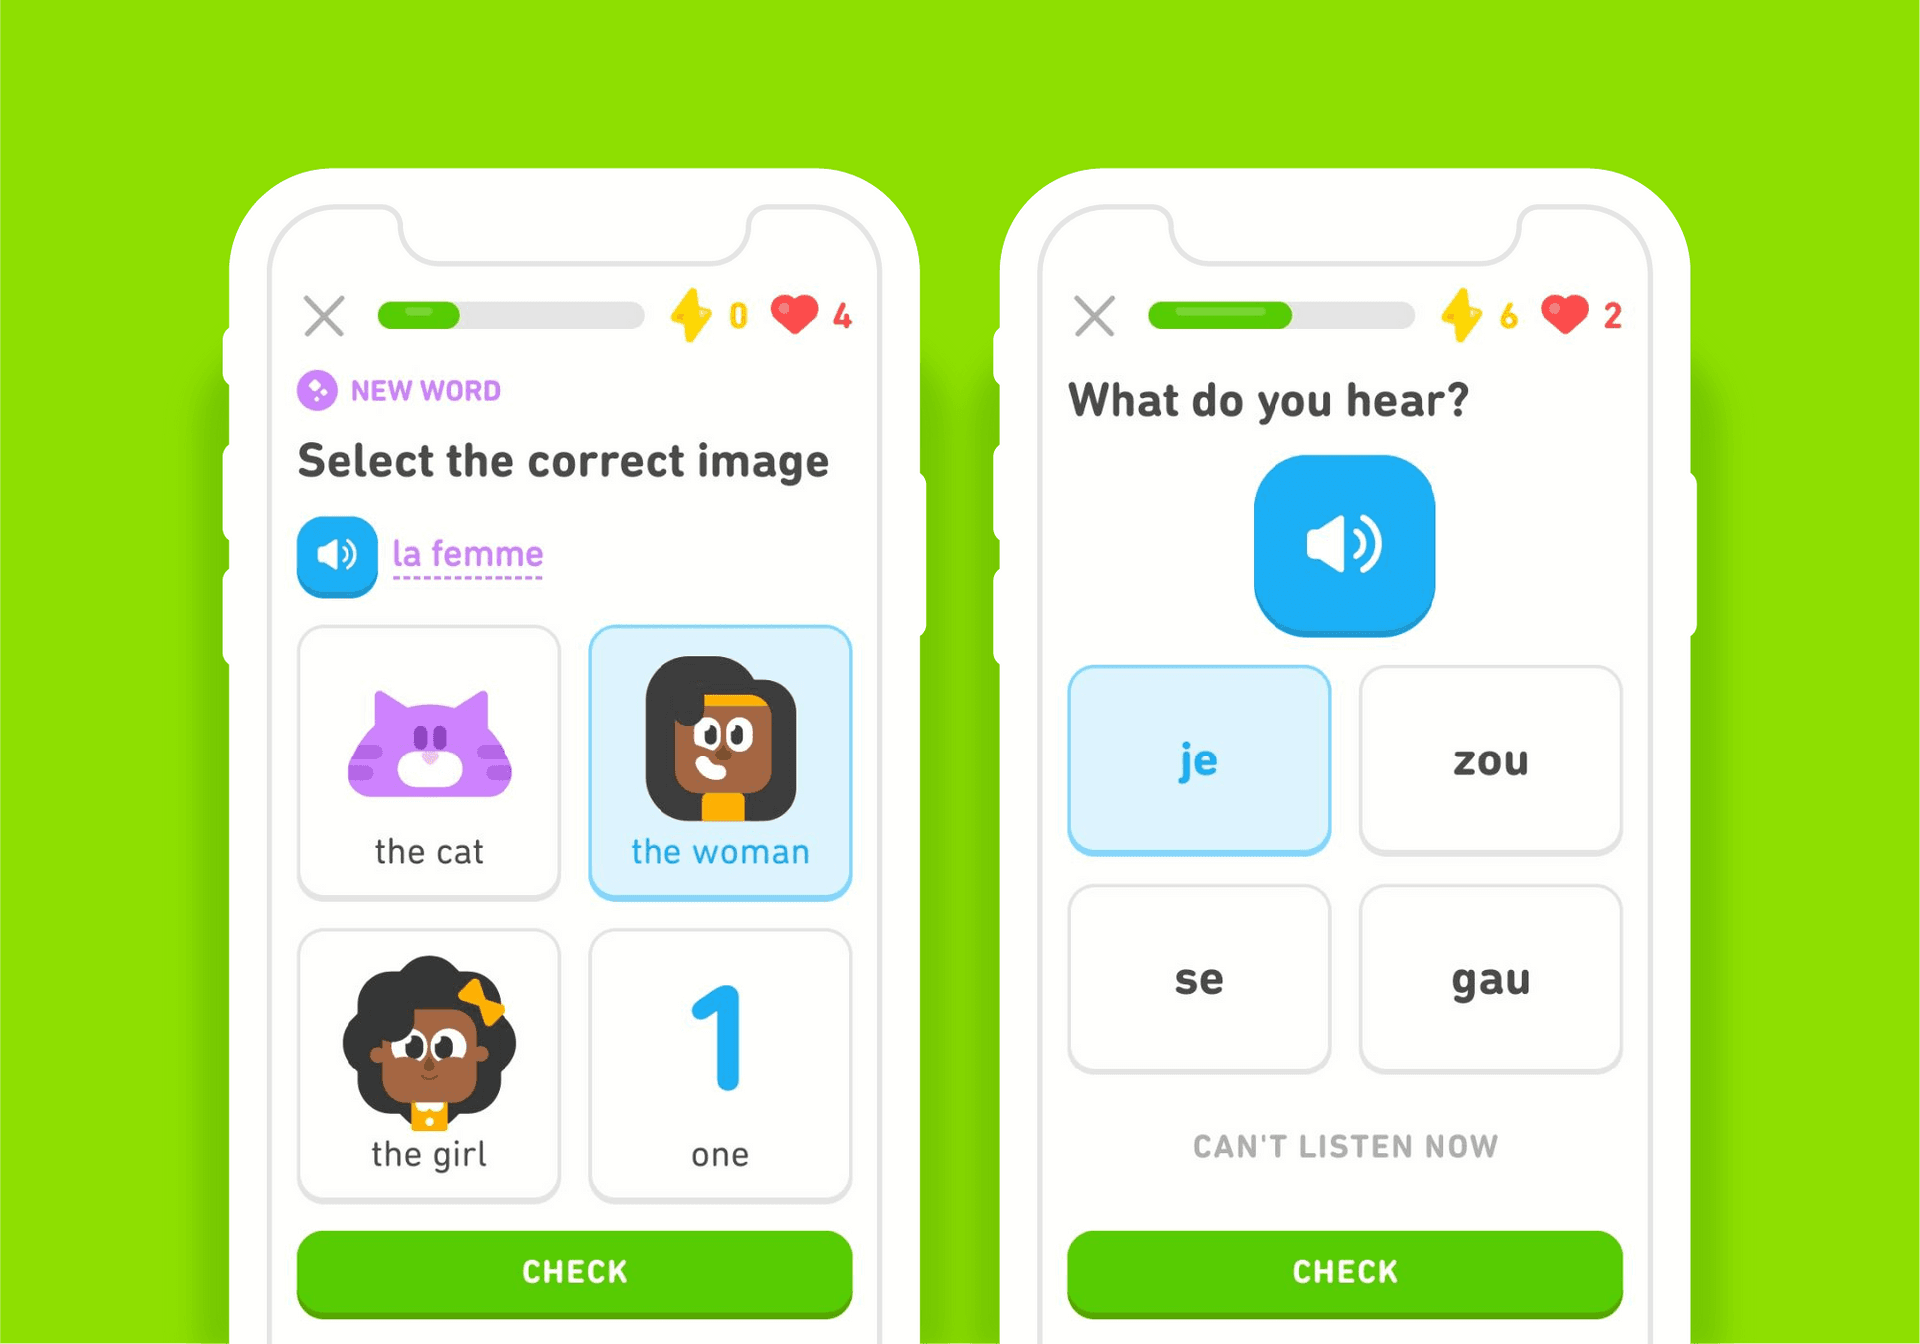 Duolingo offers different kinds of lessons